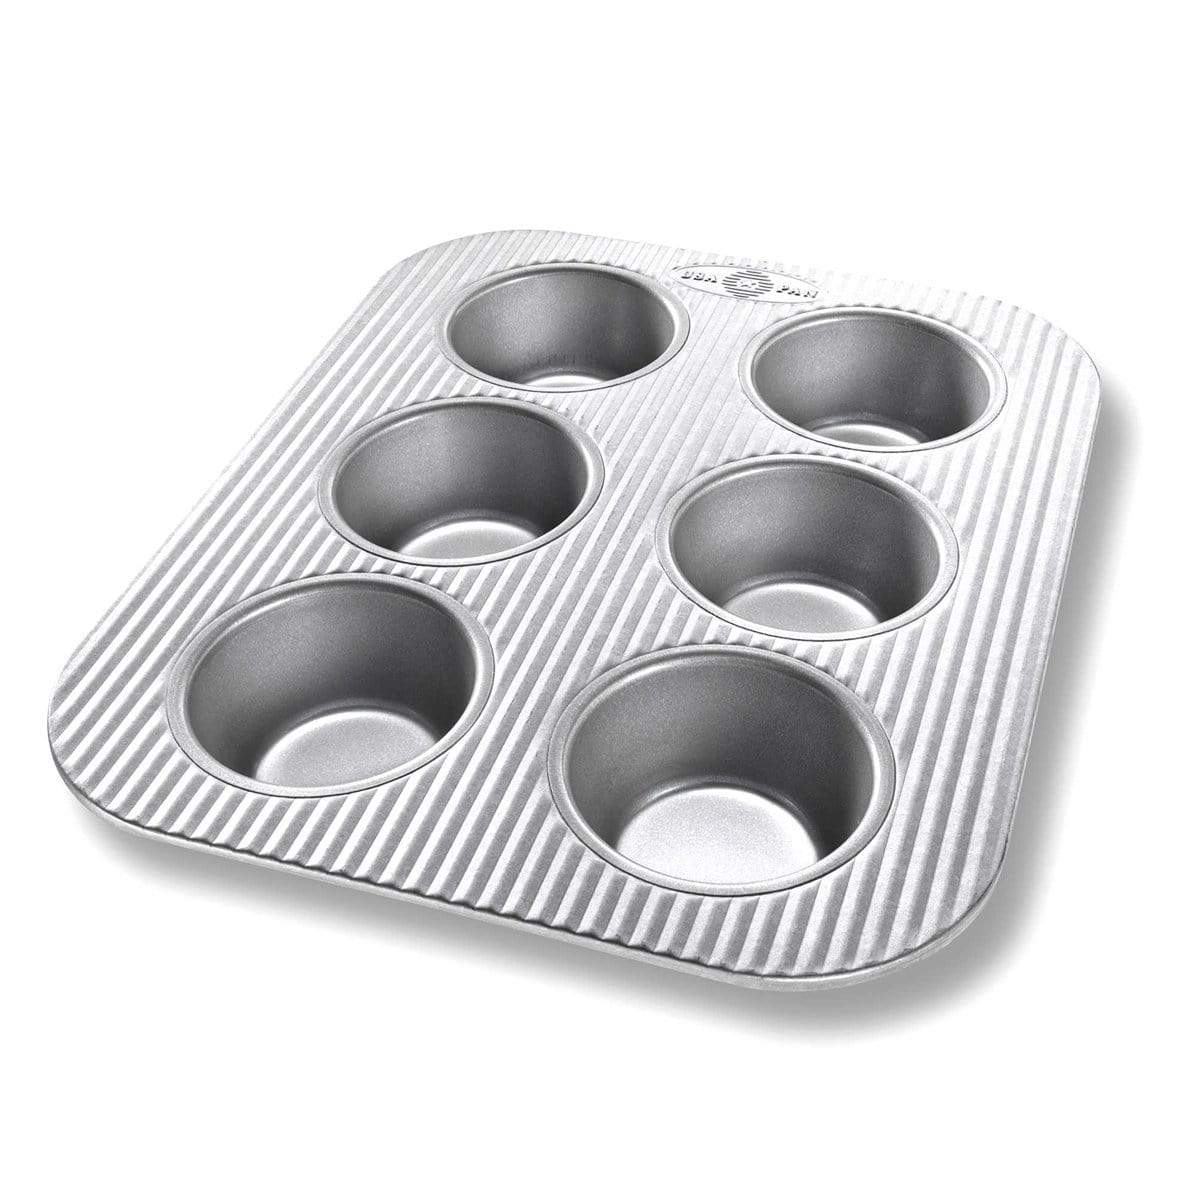 https://cdn.shopify.com/s/files/1/0474/2338/9856/products/usa-pan-usa-pan-6-cup-toaster-oven-muffin-pan-854776005086-19595492982944_1600x.jpg?v=1604601620